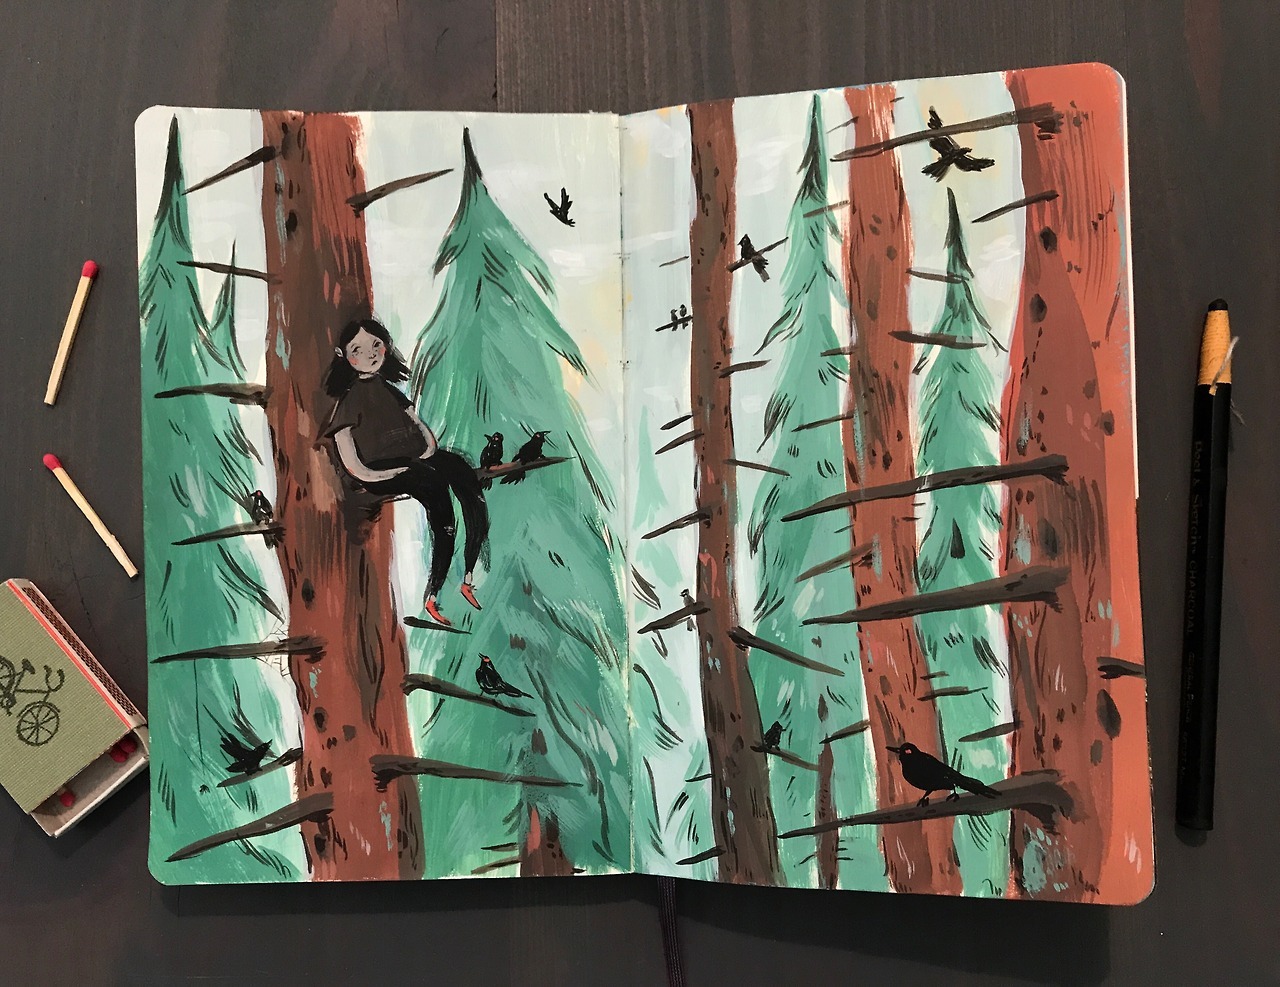 Blackbirds and Redwoods painting in moleskin sketchbook instagram @marthmay painting every day isn :) — Immediately post your art to a topic and get feedback. Join our new community, EatSleepDraw Studio, today!